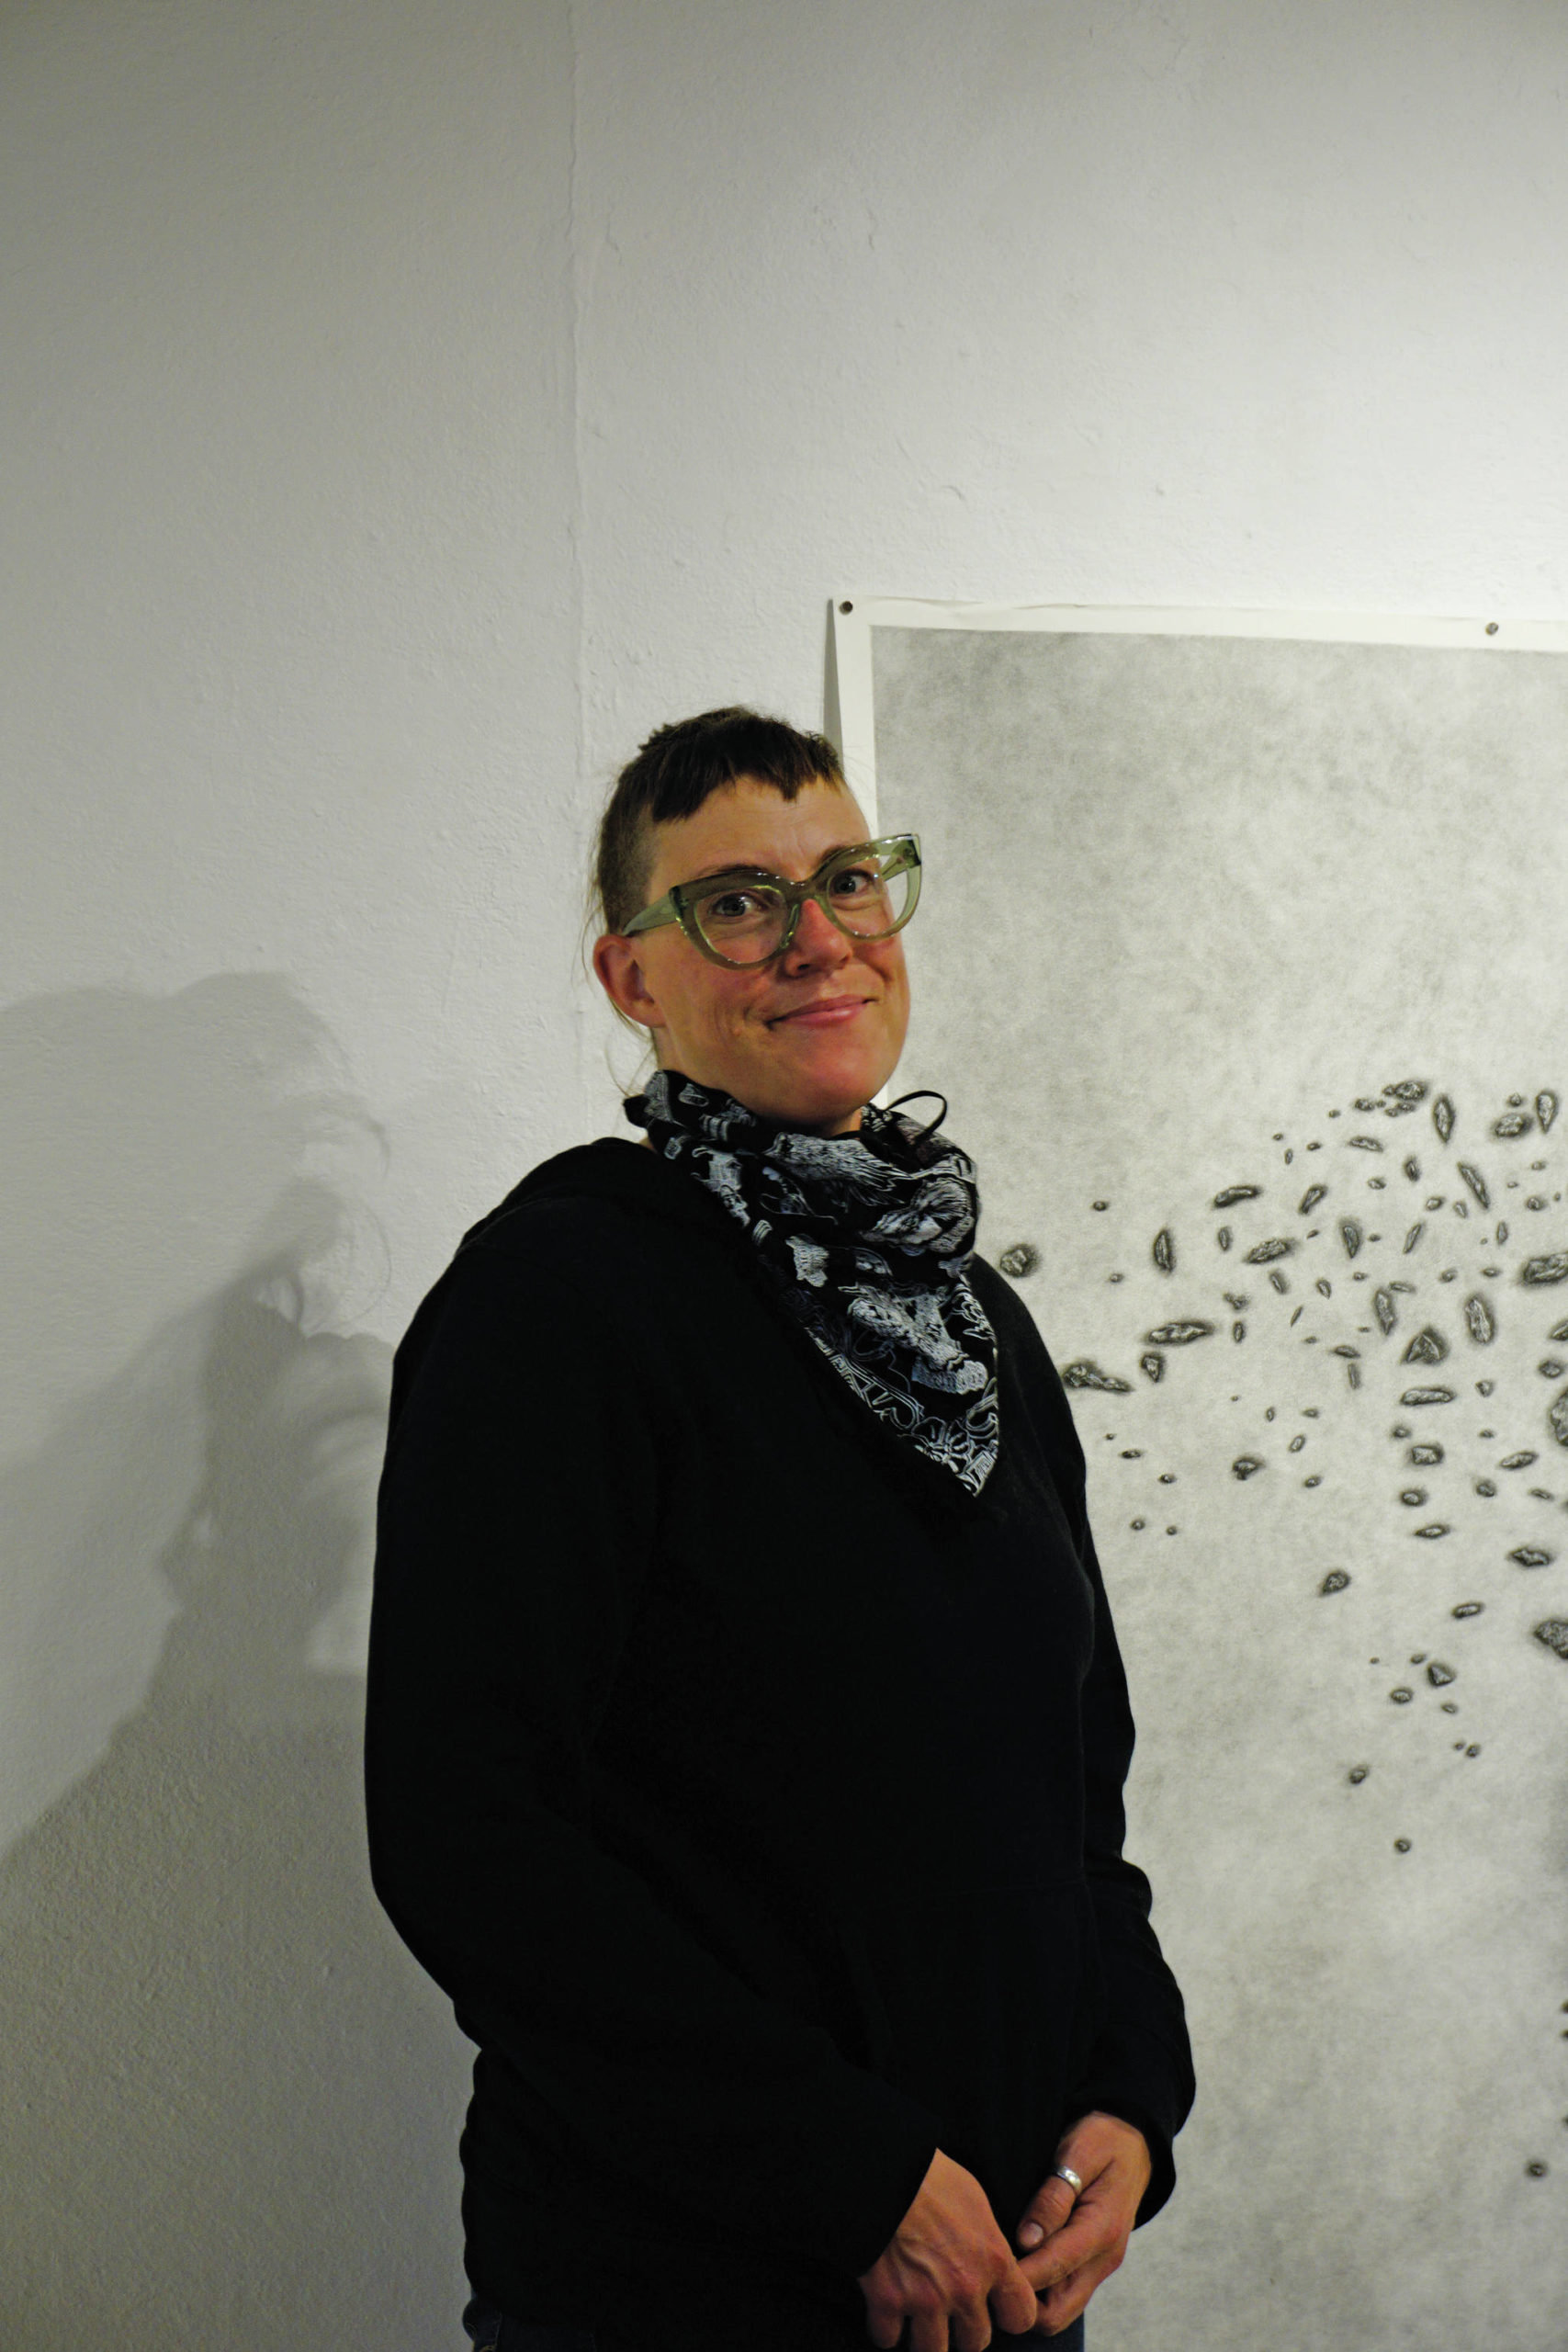 Michael Armstrong / Homer News
Bunnell Street Arts Center Artist in Residence Nina Elder stands next to a drawing from her series, “It Will Not Be the Same, But It Might Be Beautiful,” drawings of puzzle stones collected in the area near McCarthy.